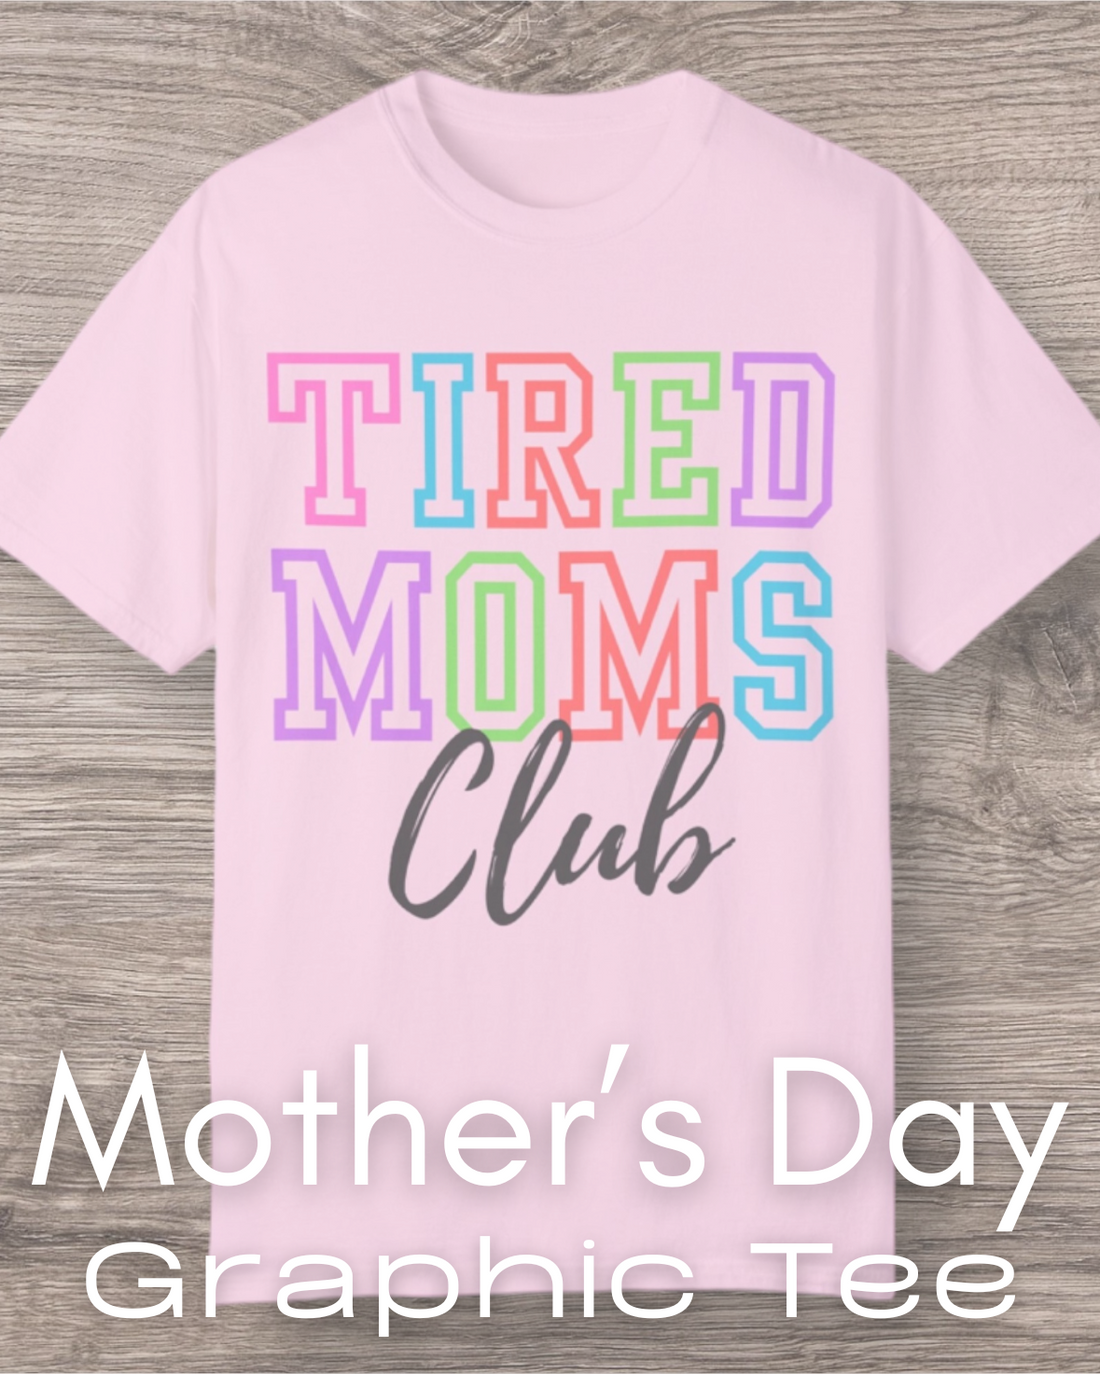  Mother's Day Graphic Tee